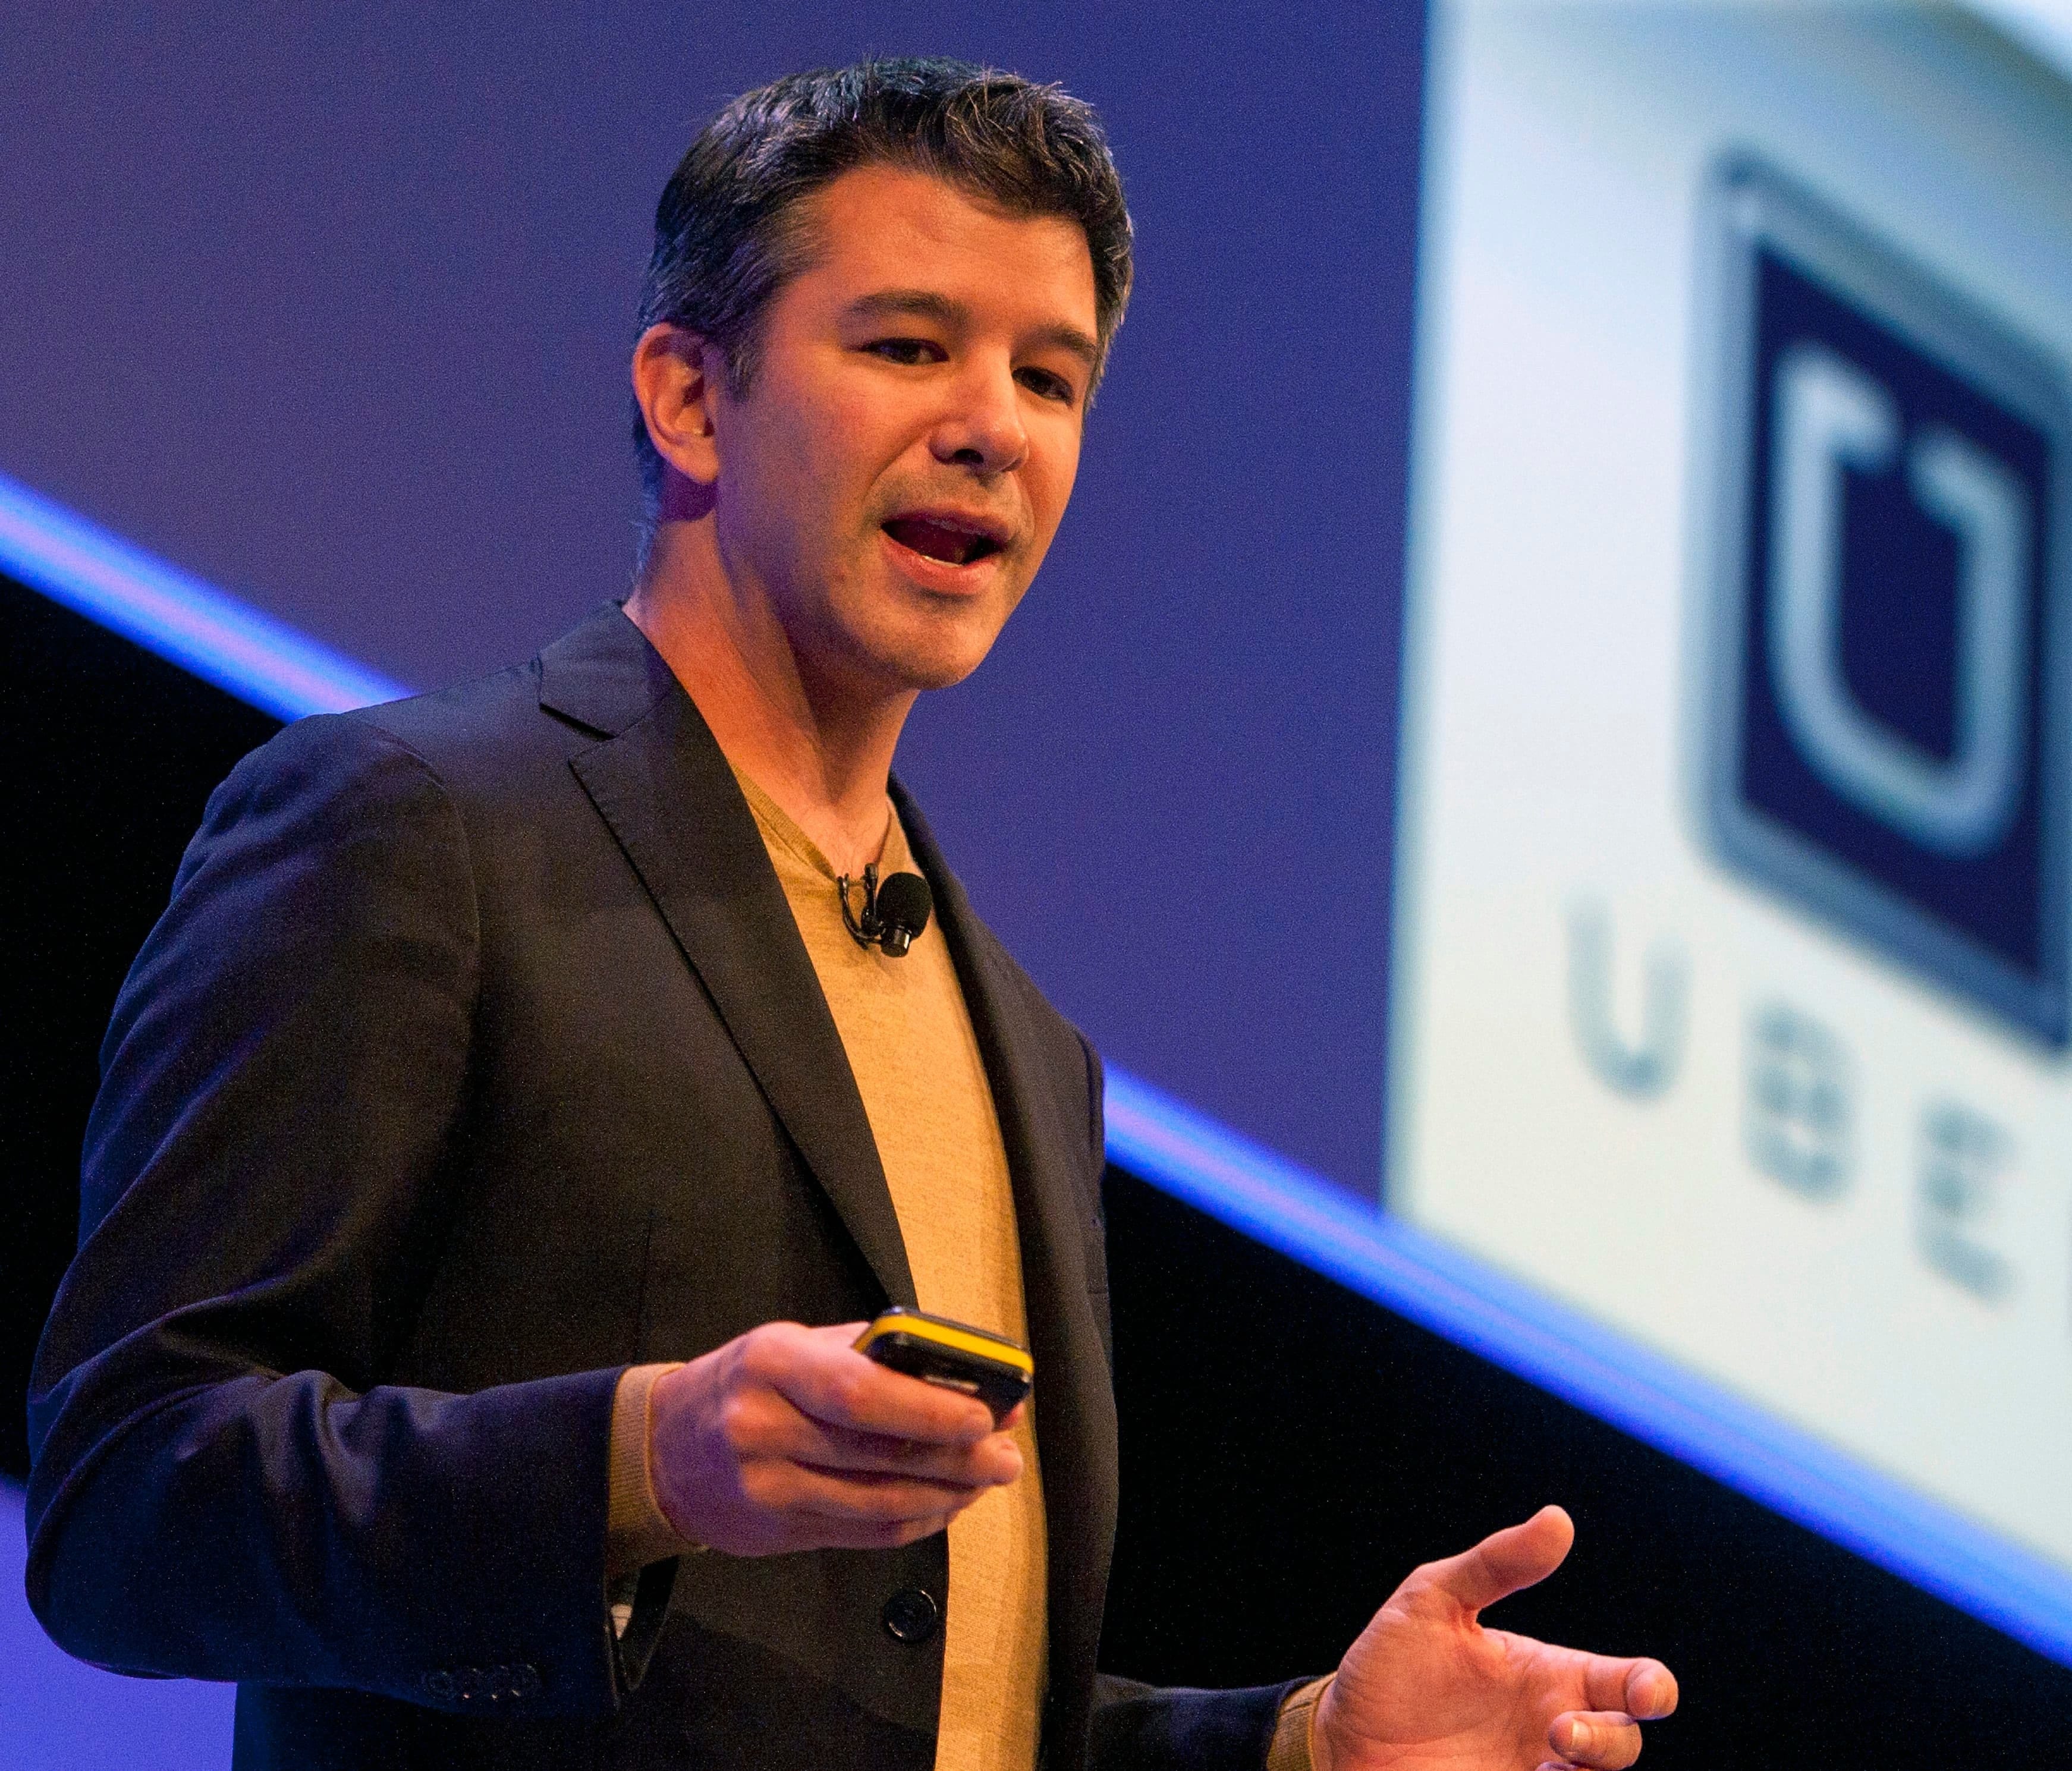 Former Uber CEO Travis Kalanick delivers a speech in London on October 3, 2014.